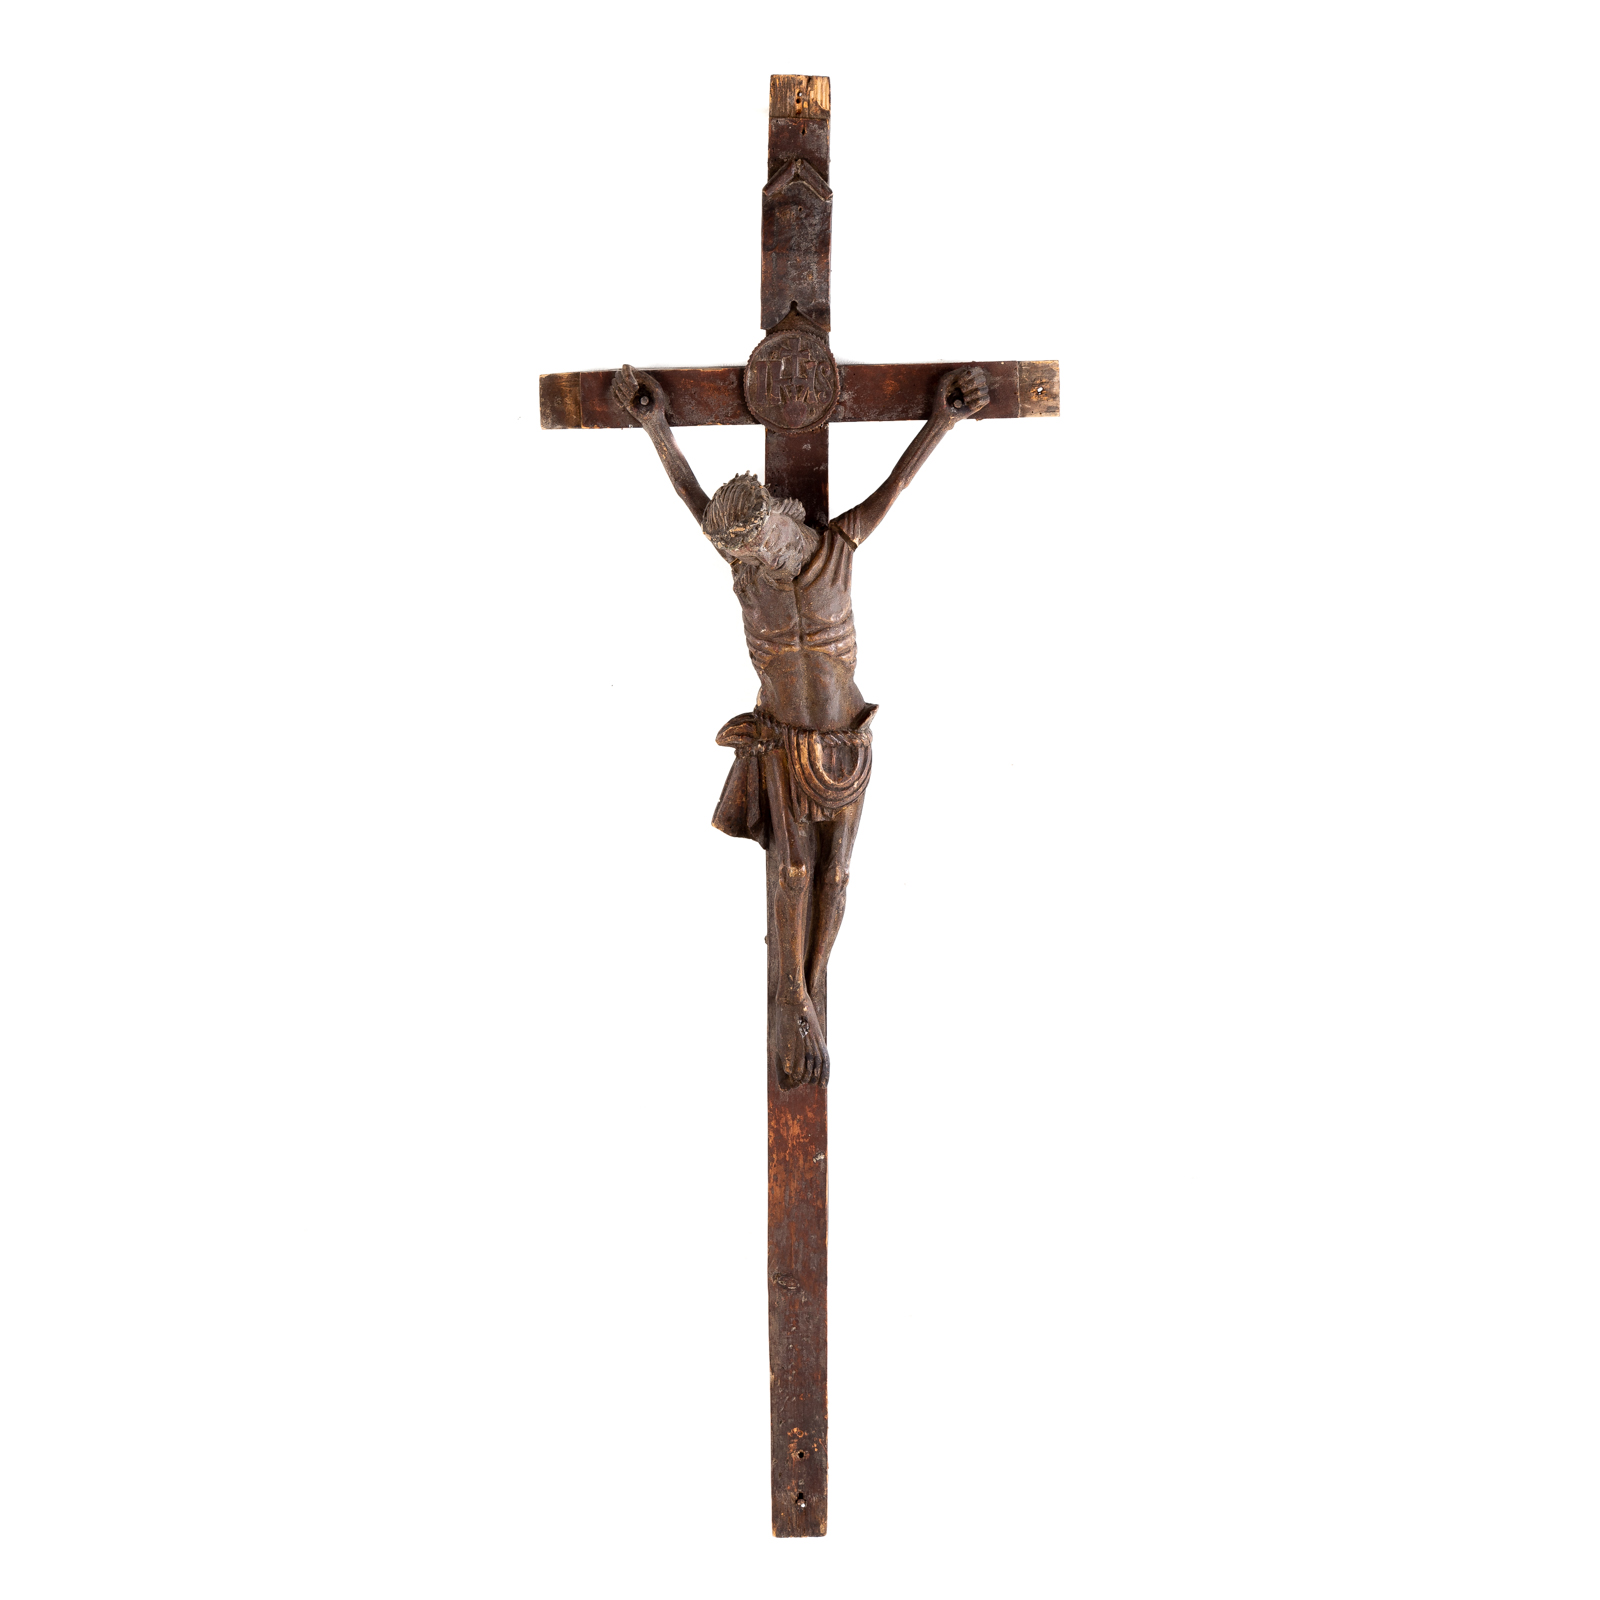 LITHUANIAN CARVED LIME WOOD CRUCIFIX